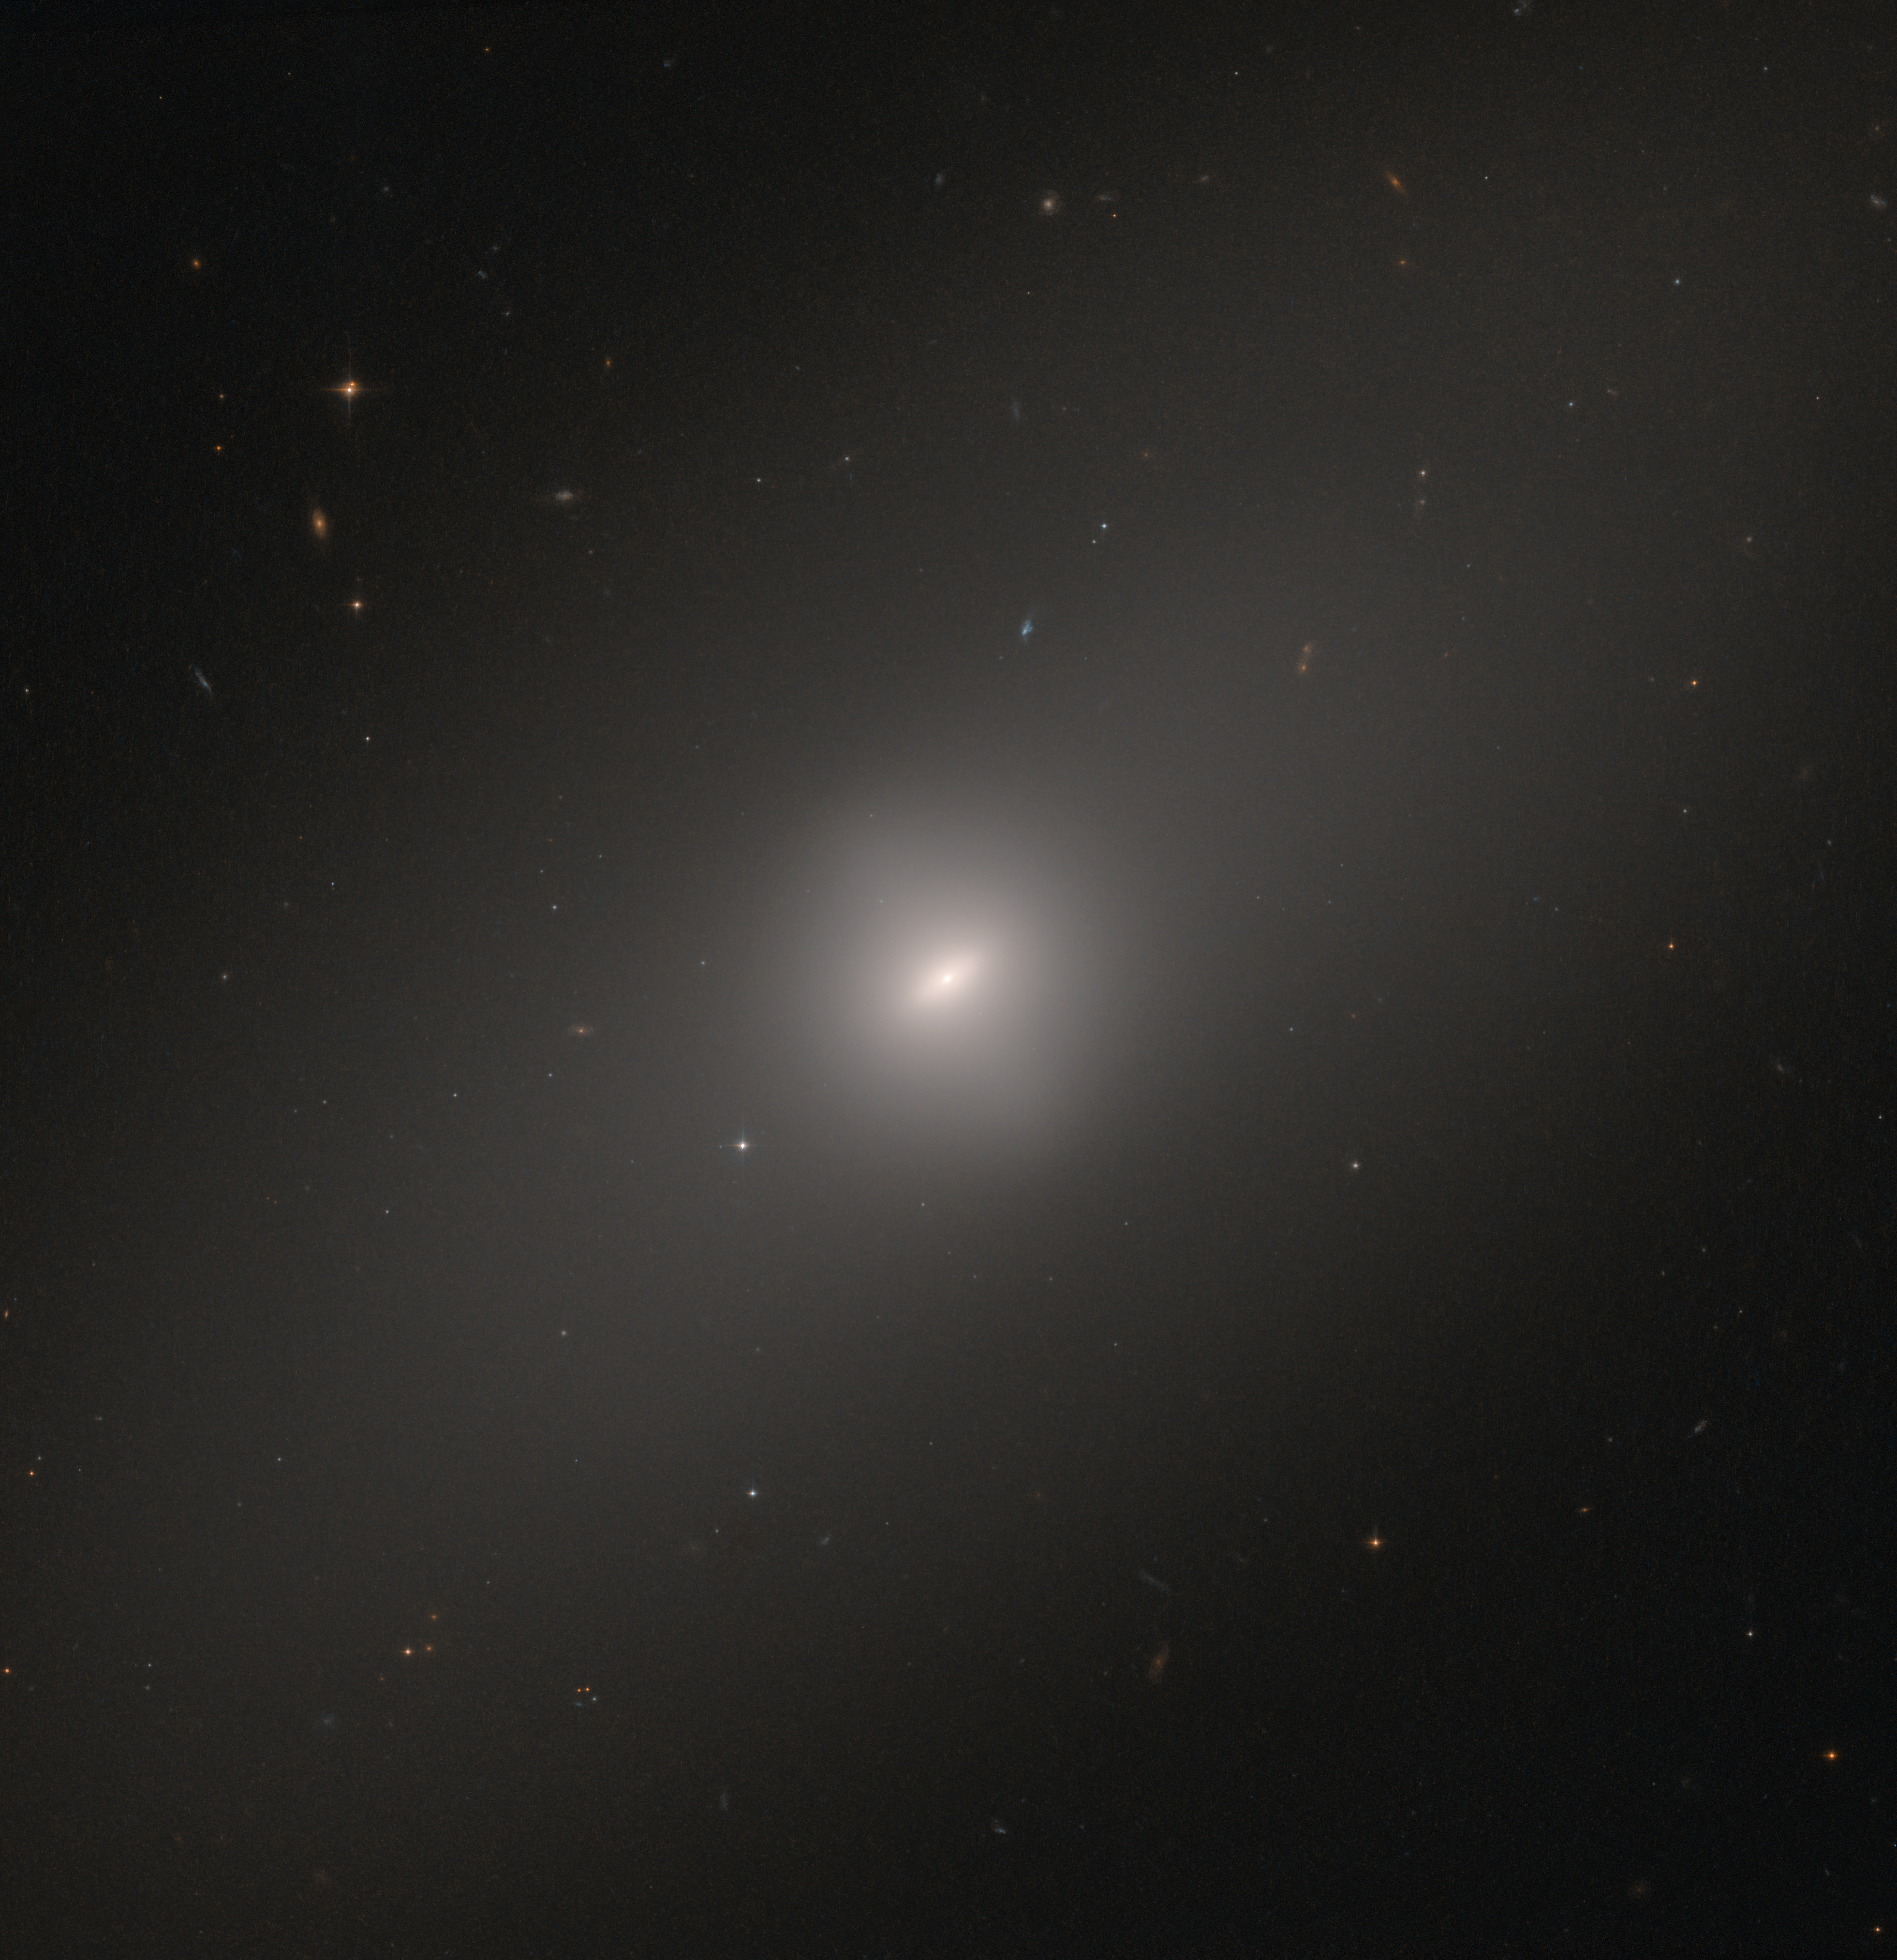 Hubble Views a Galaxy Settling into Old Age